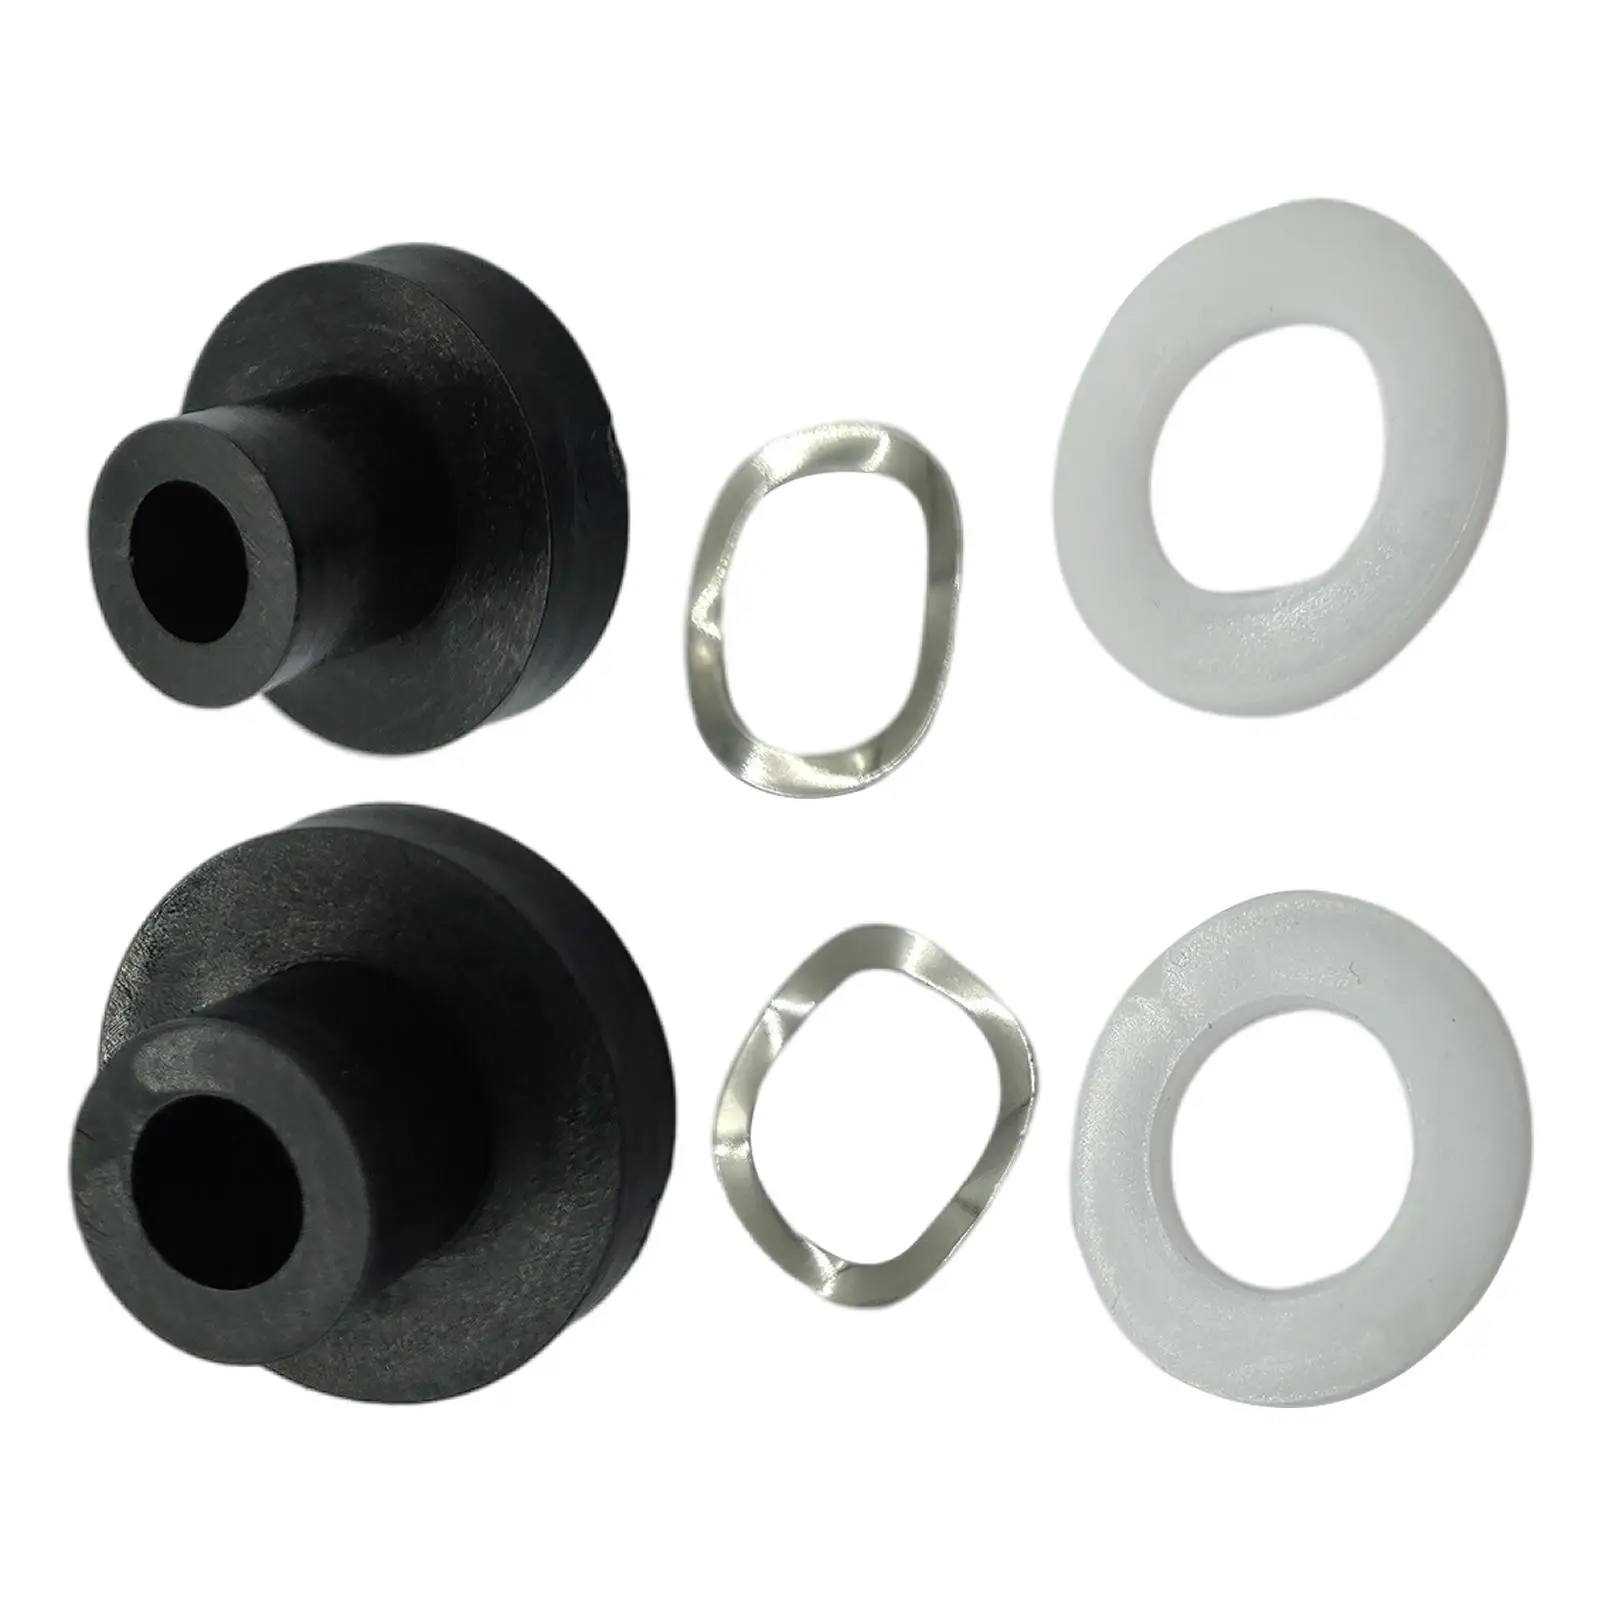 2 Pieces Car Window Bushings 909-925 Accessories Professional Replacement Easy to Install High Performance Fit for Mazda Miata